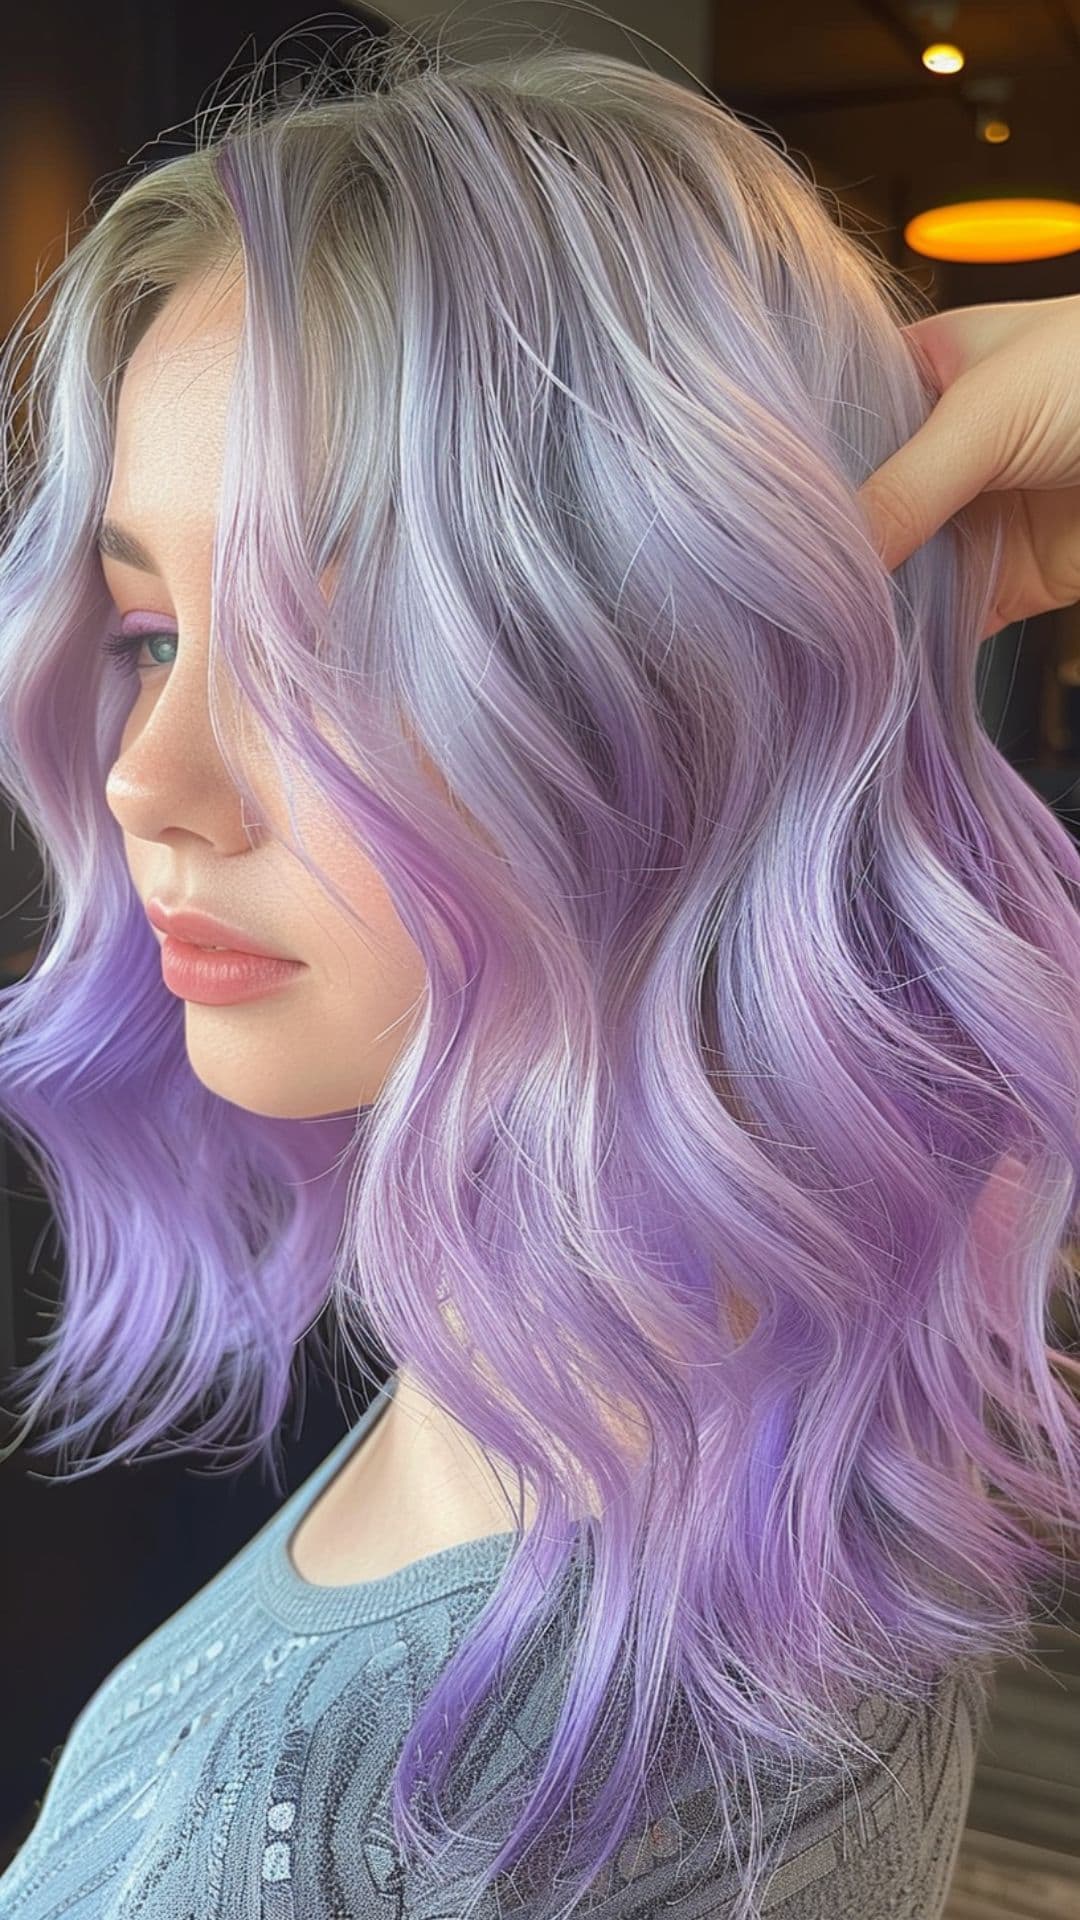 A woman modelling a silver to lilac ombre hair.